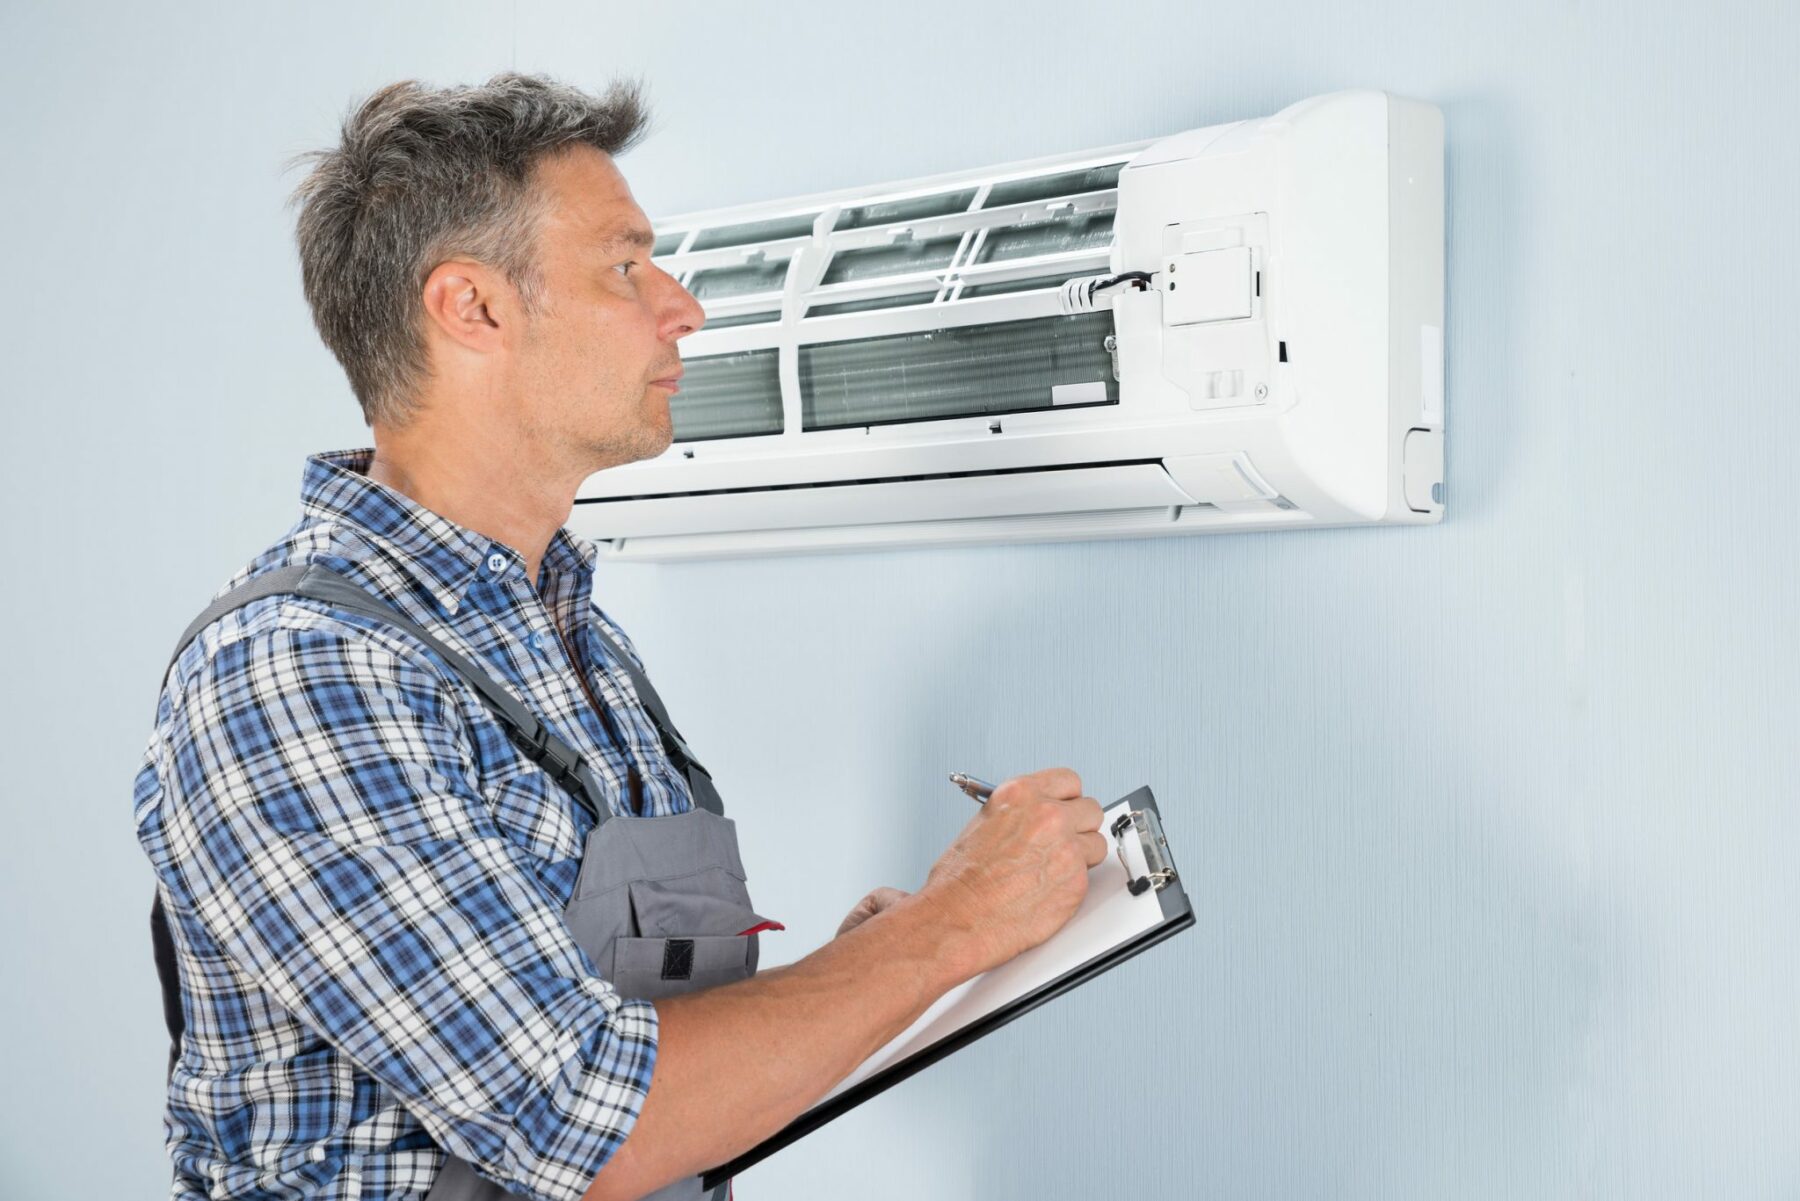 Boiler Heating & Cooling professionals explain why homeowners should get a second opinion about HVAC services.